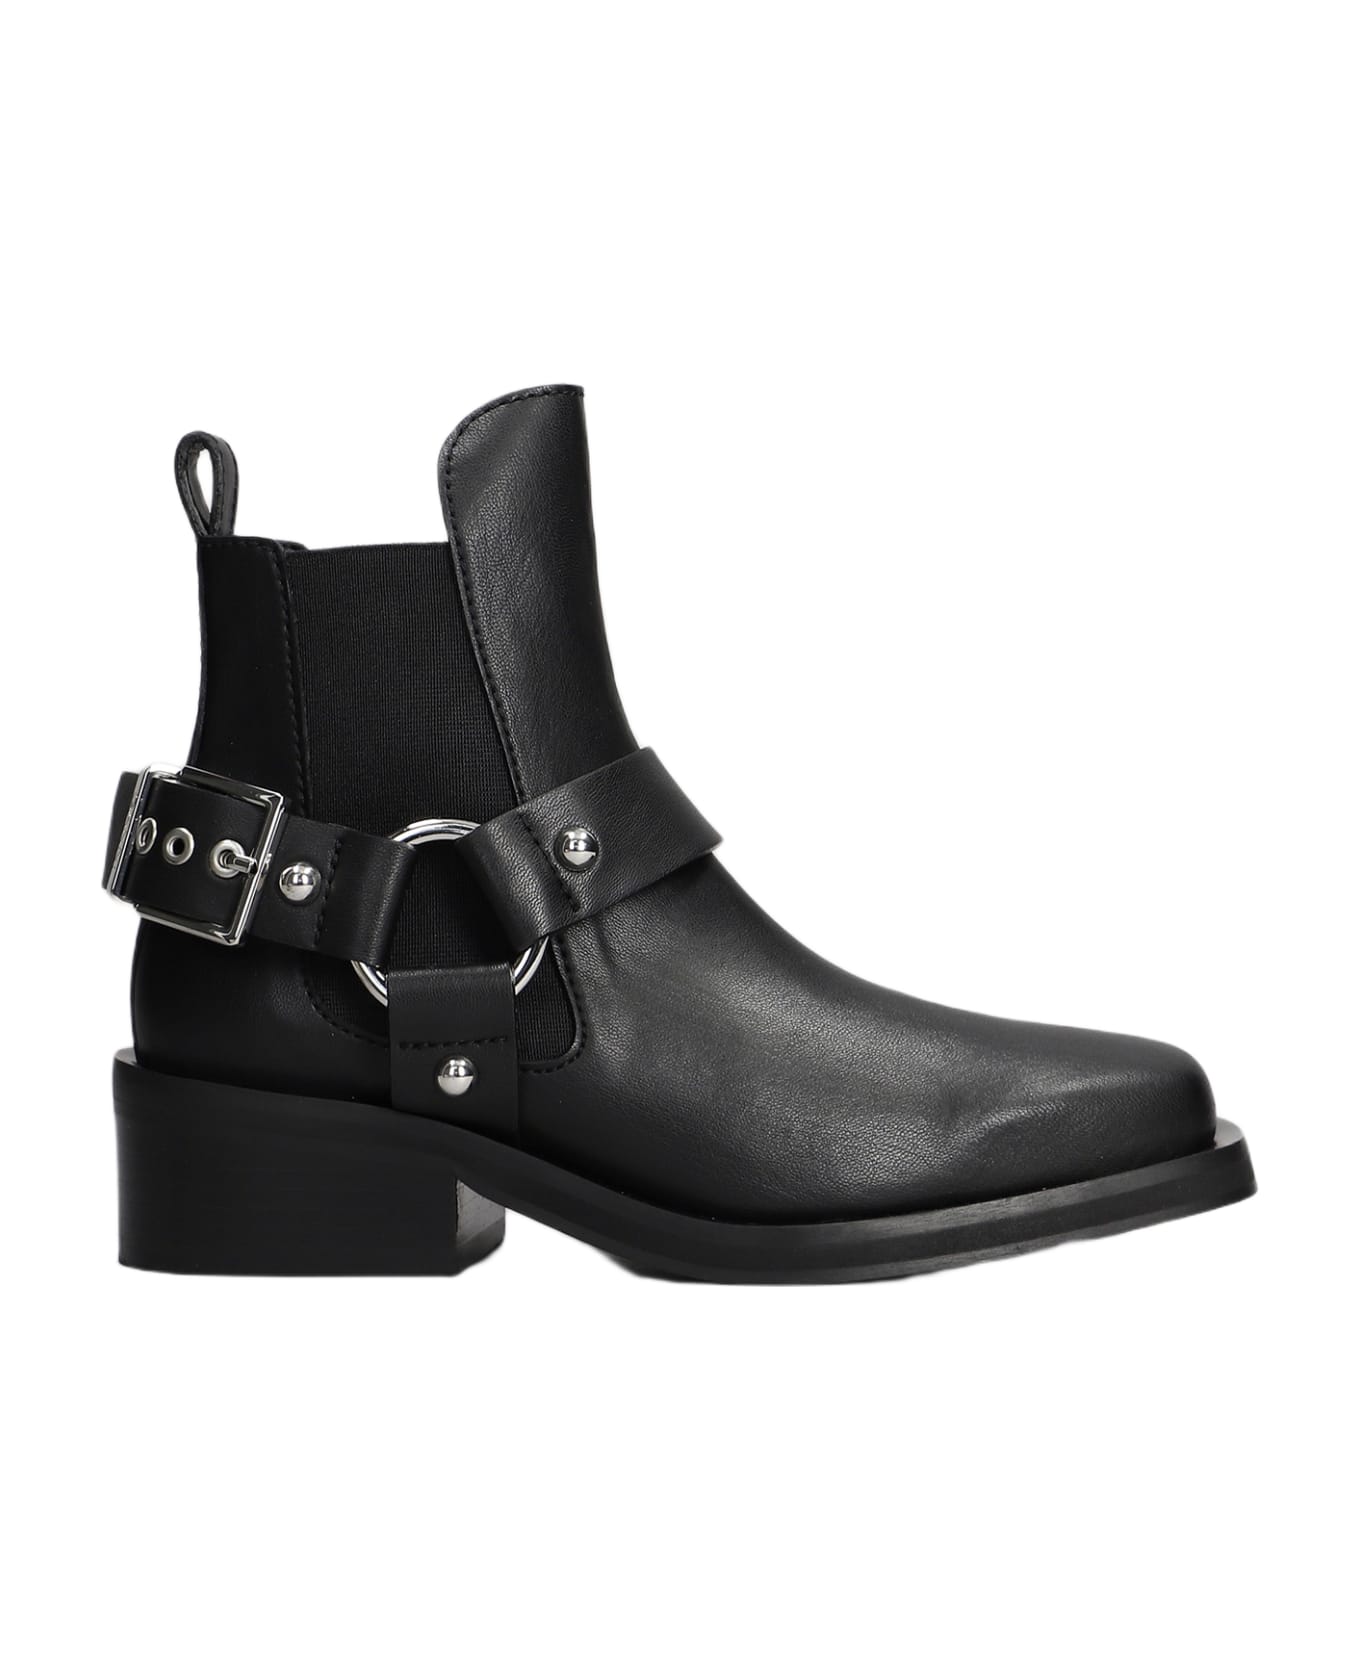 Ganni High Heels Ankle Boots In Black Leather - Black ブーツ